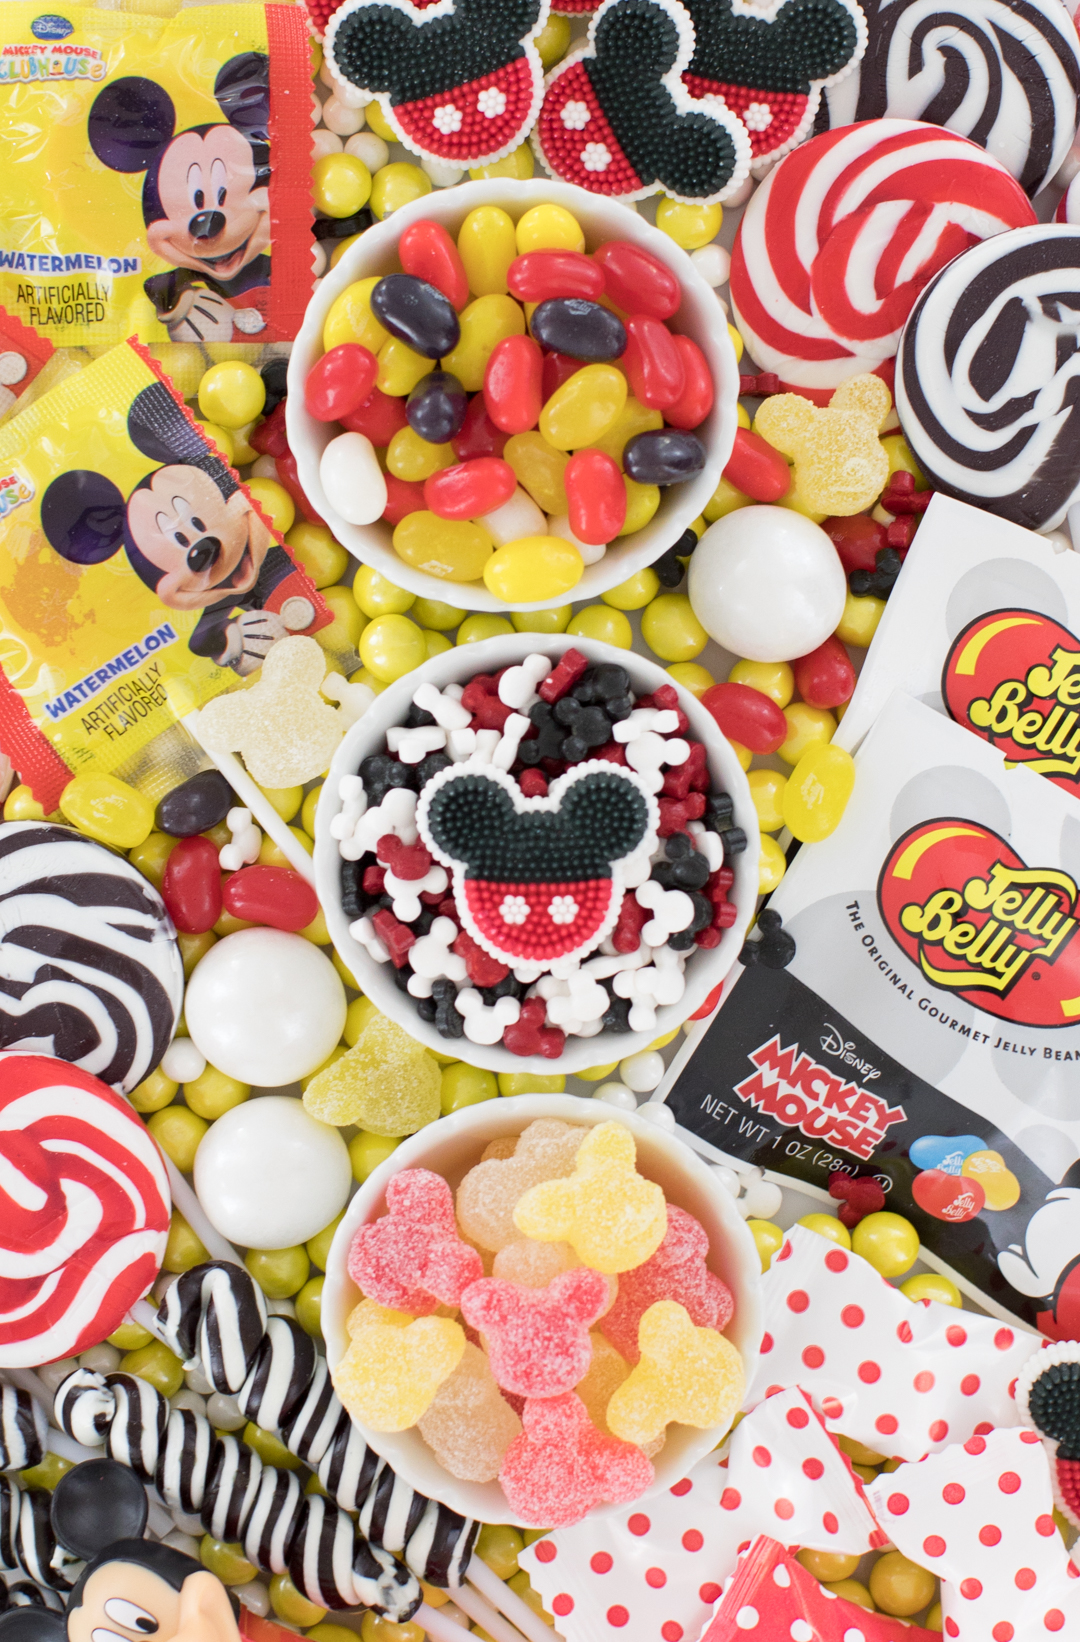 tray of mickey mouse inspired candies that are black, white, yellow and red